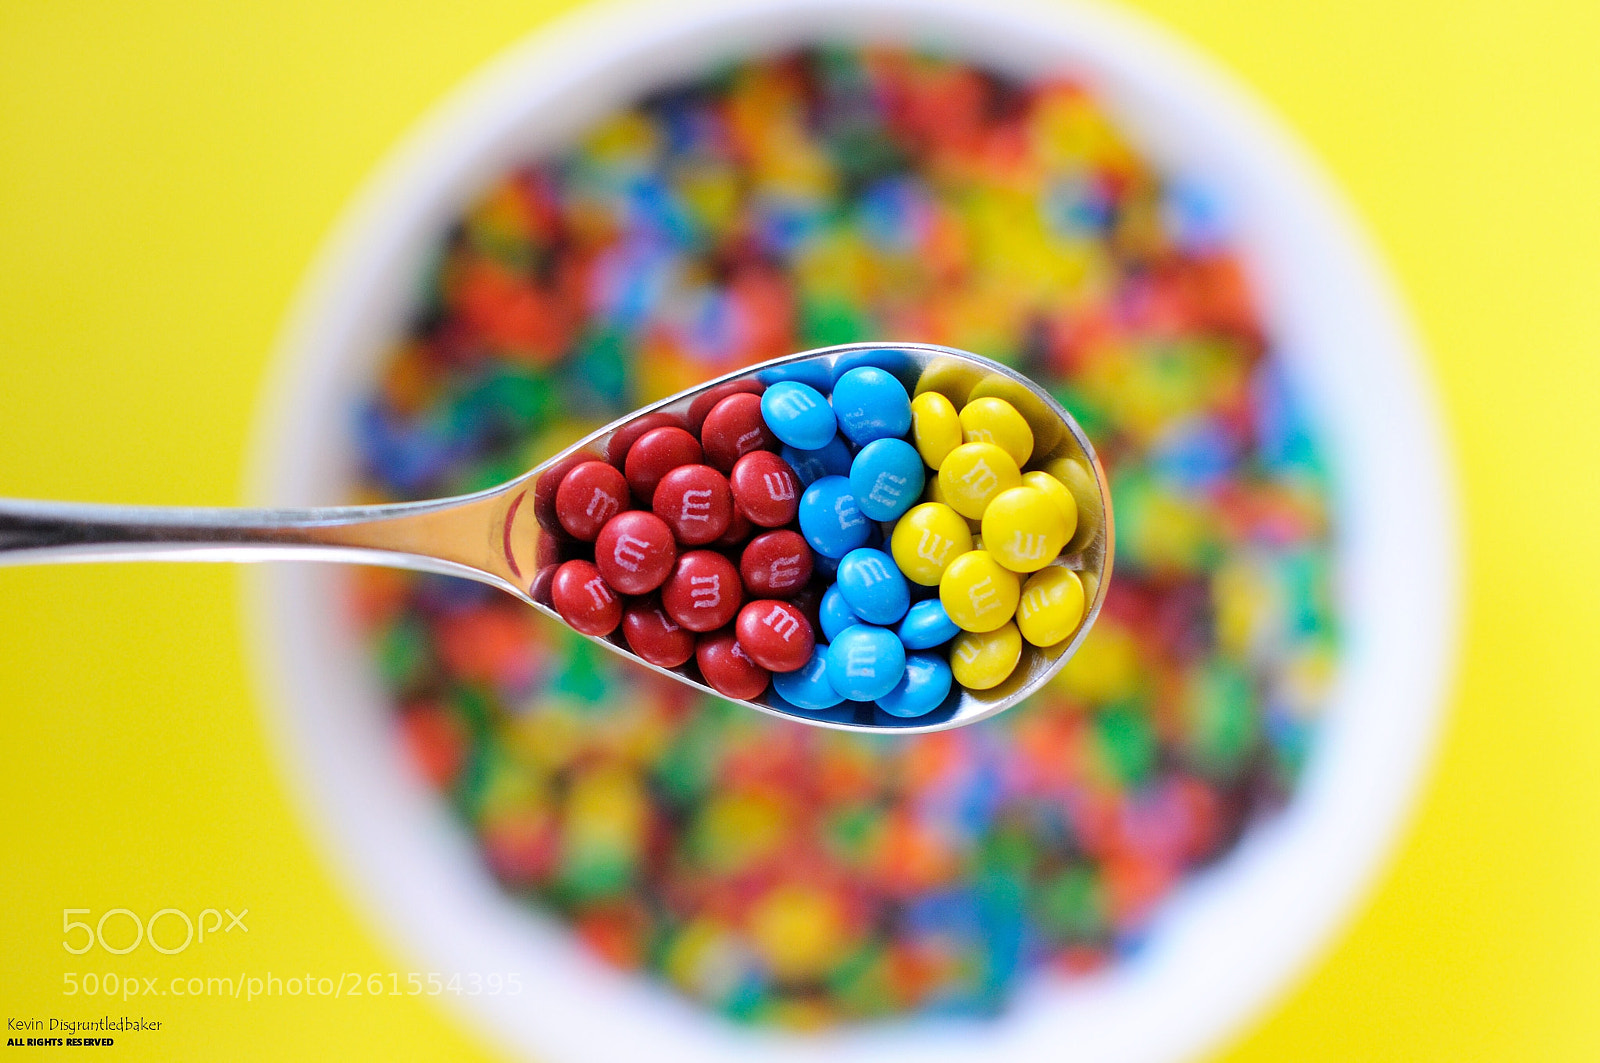 Nikon D90 sample photo. Primary colored candy photography